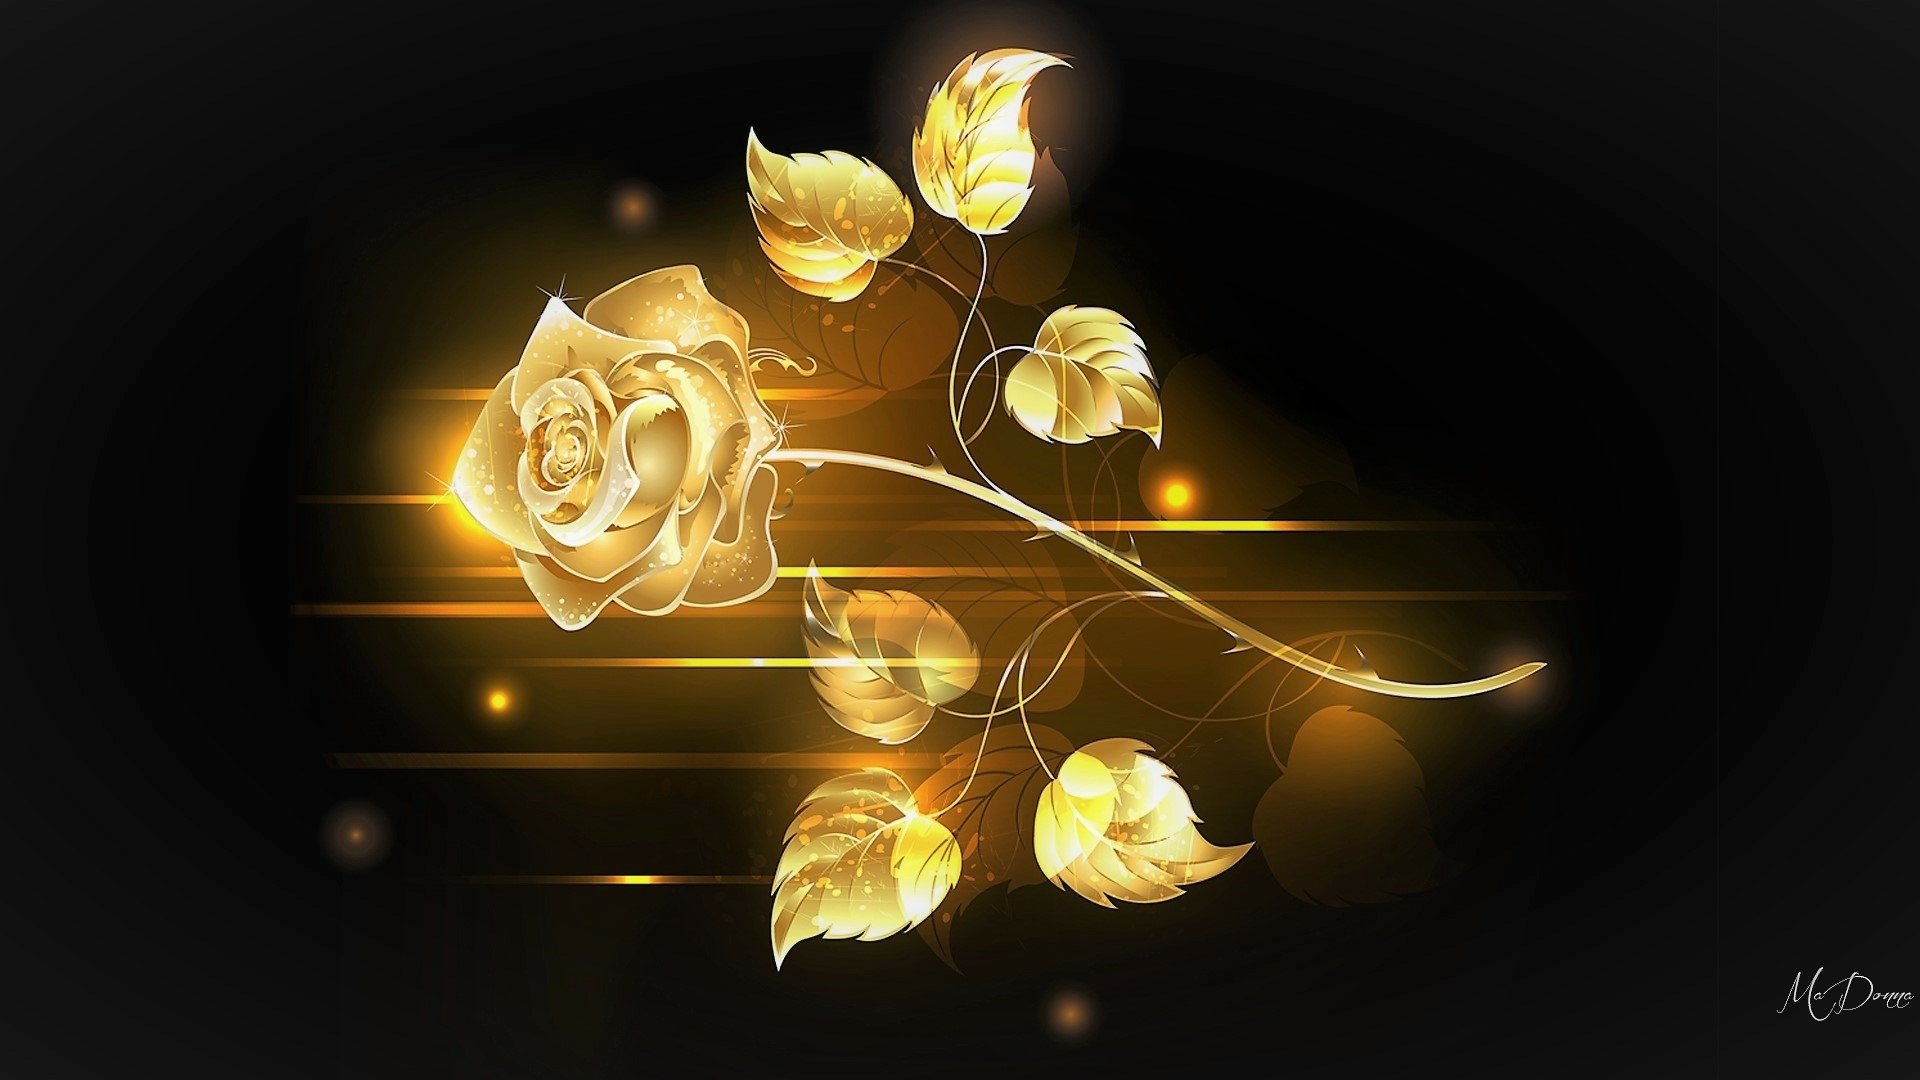 Blue And Golden Rose IPhone Wallpaper HD  IPhone Wallpapers  iPhone  Wallpapers